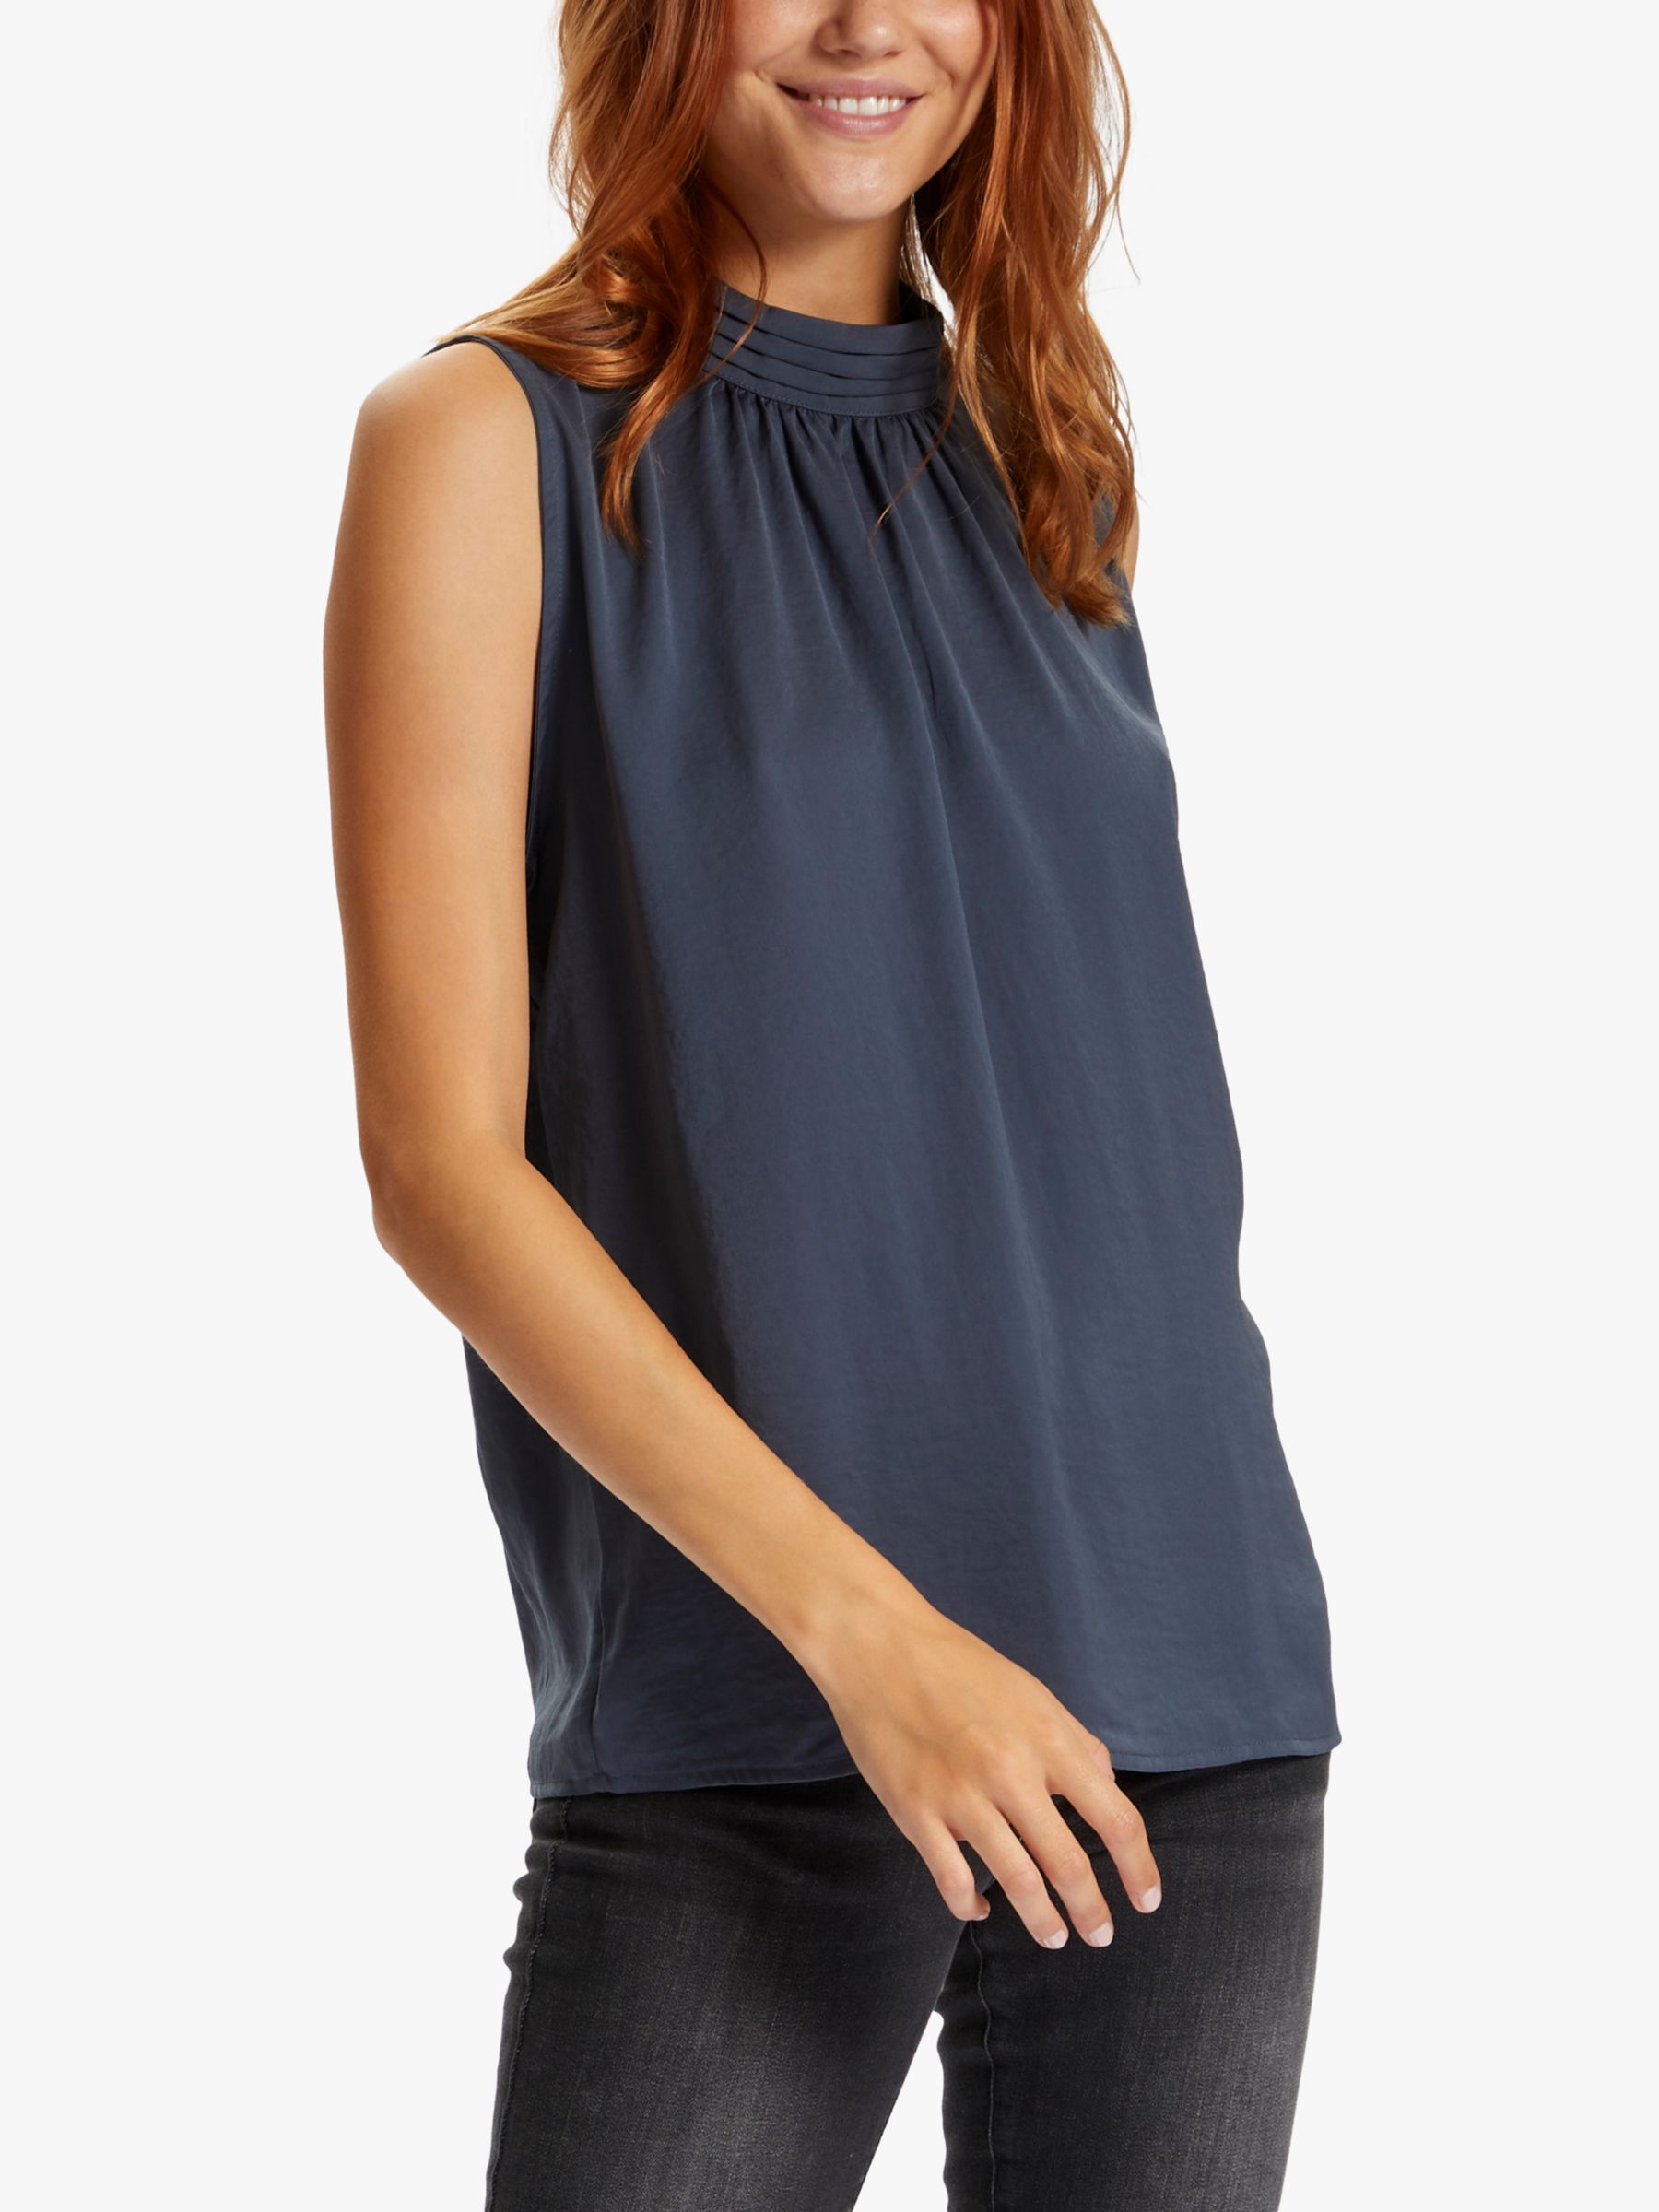 Going Out Tops For Women, Ladies Dressy Tops